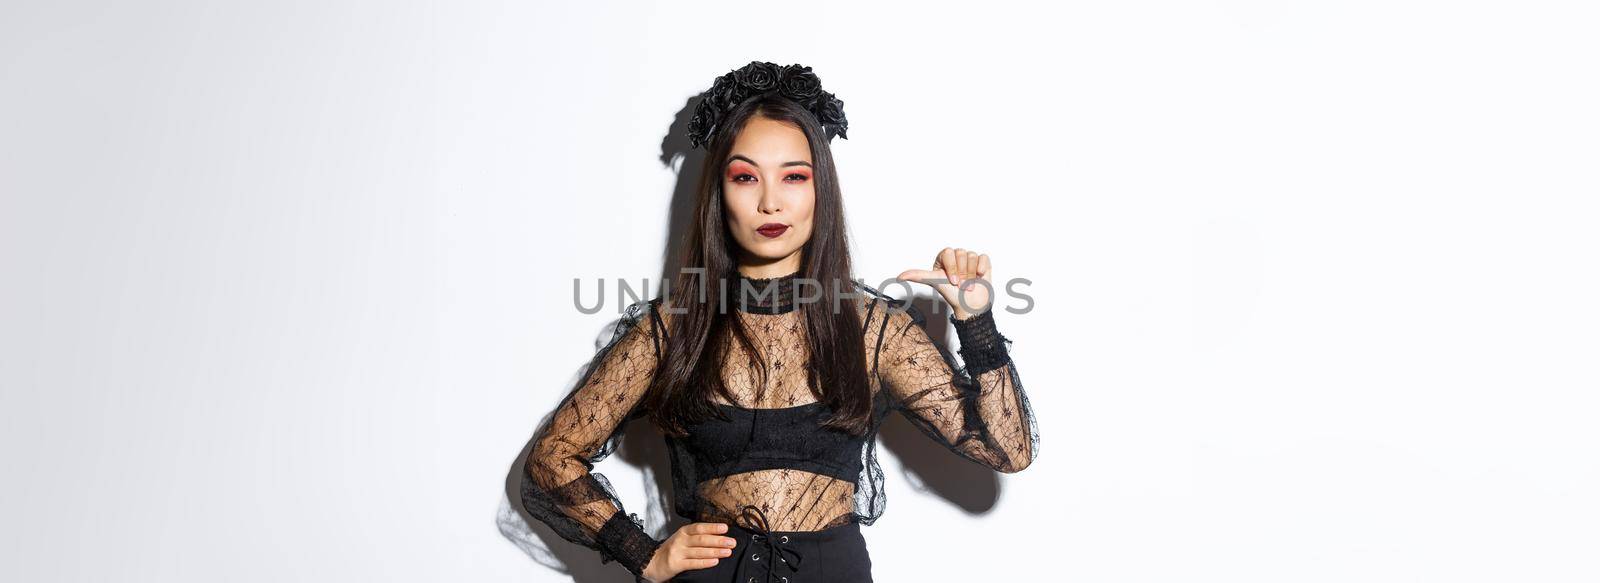 Confident stylish asian woman looking determined, wearing black lace dress for halloween party, pointing at herself sassy, standing over white background.